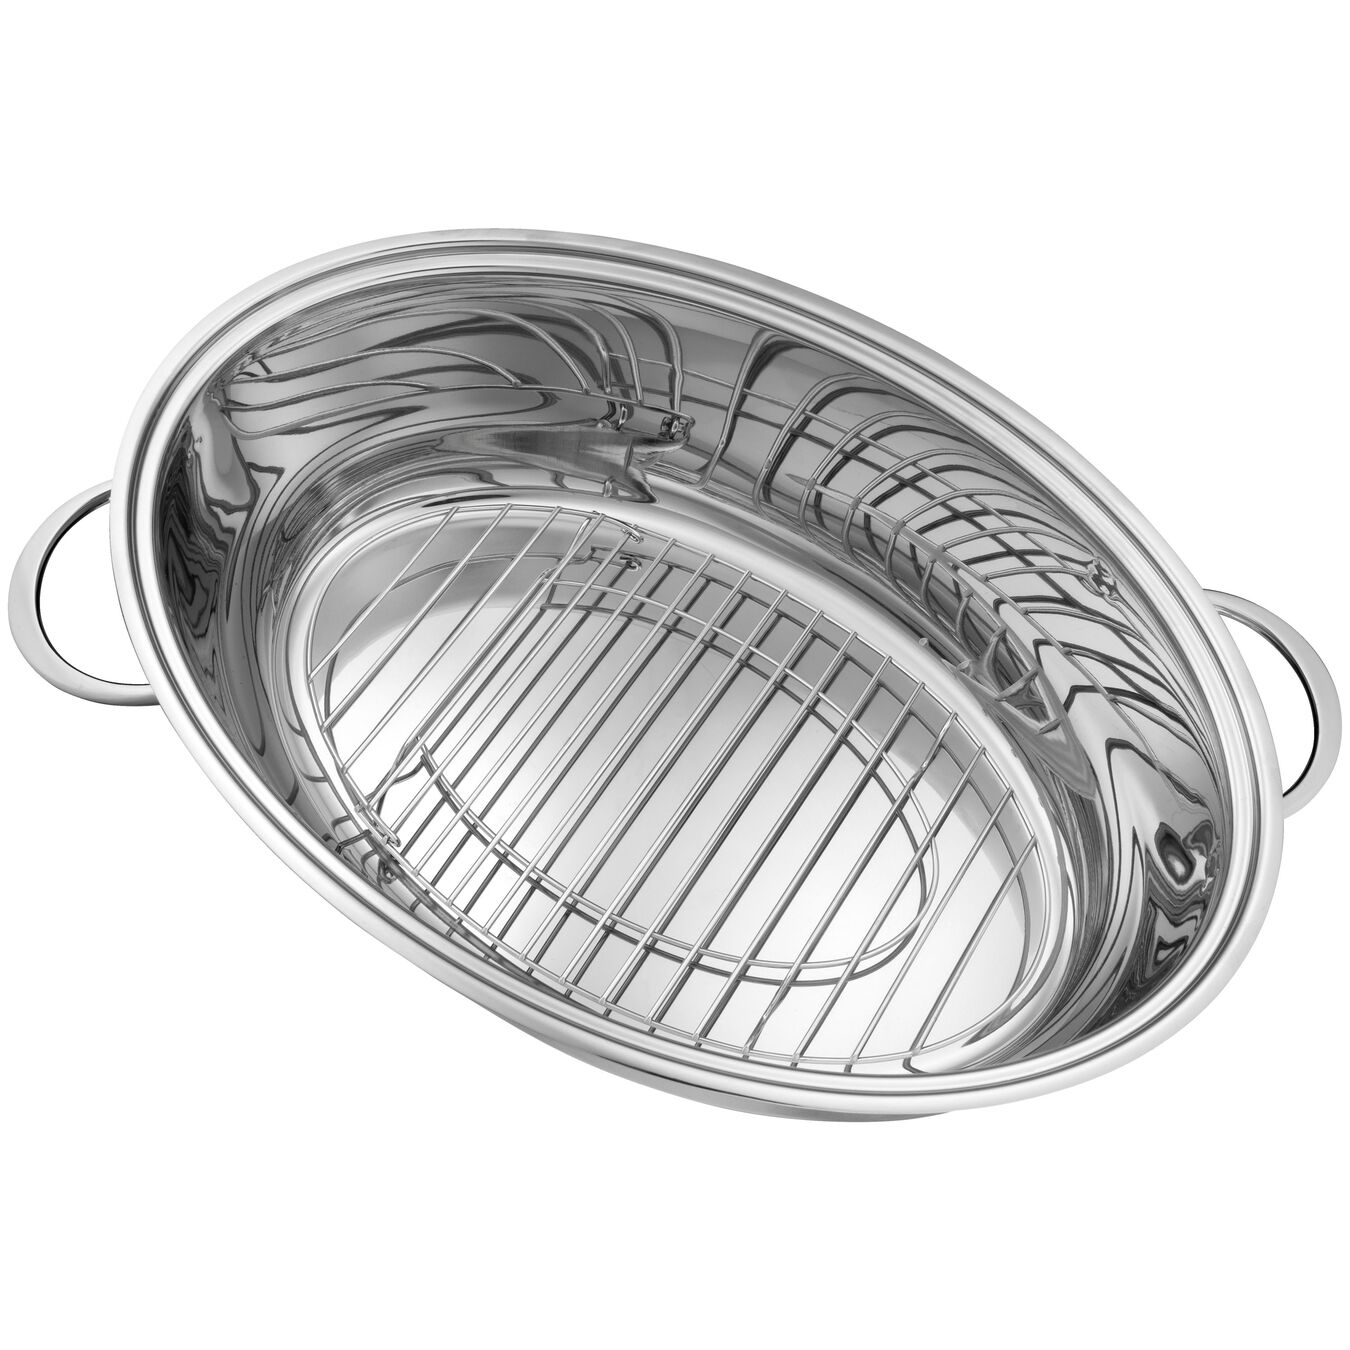 38 cm 18/10 Stainless Steel oval Roaster, silver,,large 6